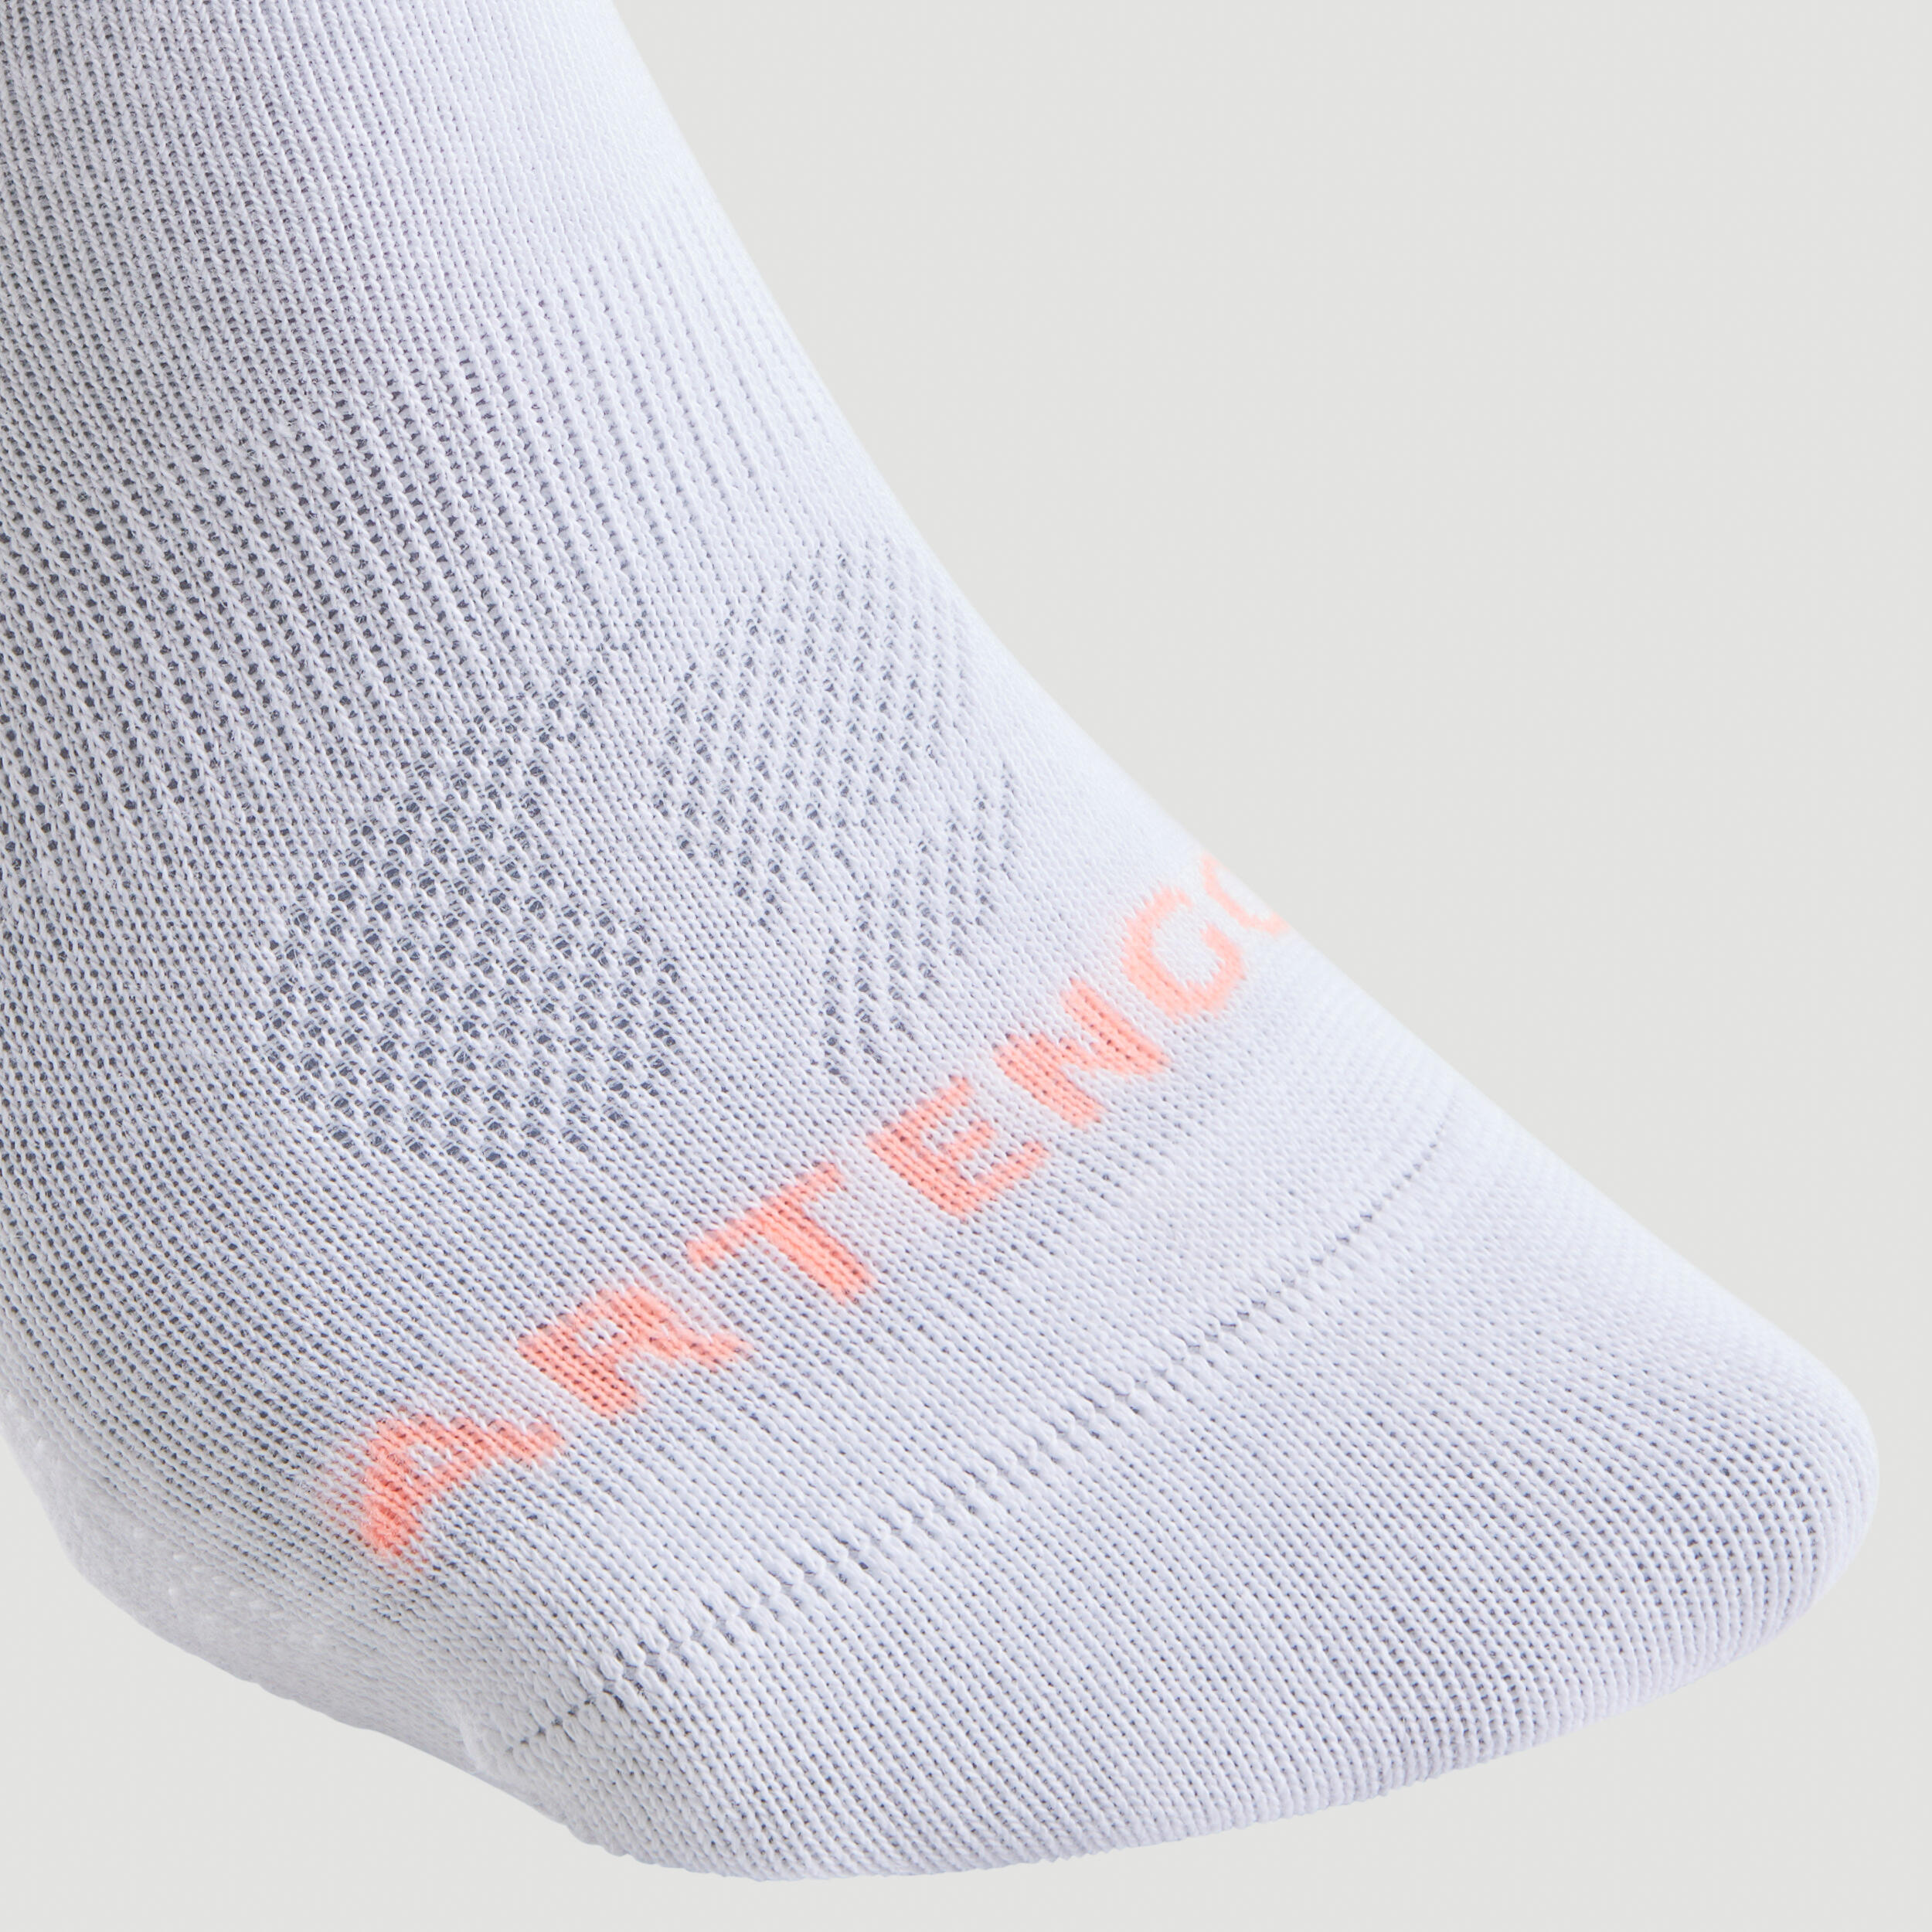 Low Sports Socks RS 160 Tri-Pack - Sky Blue/White/Pink 13/15